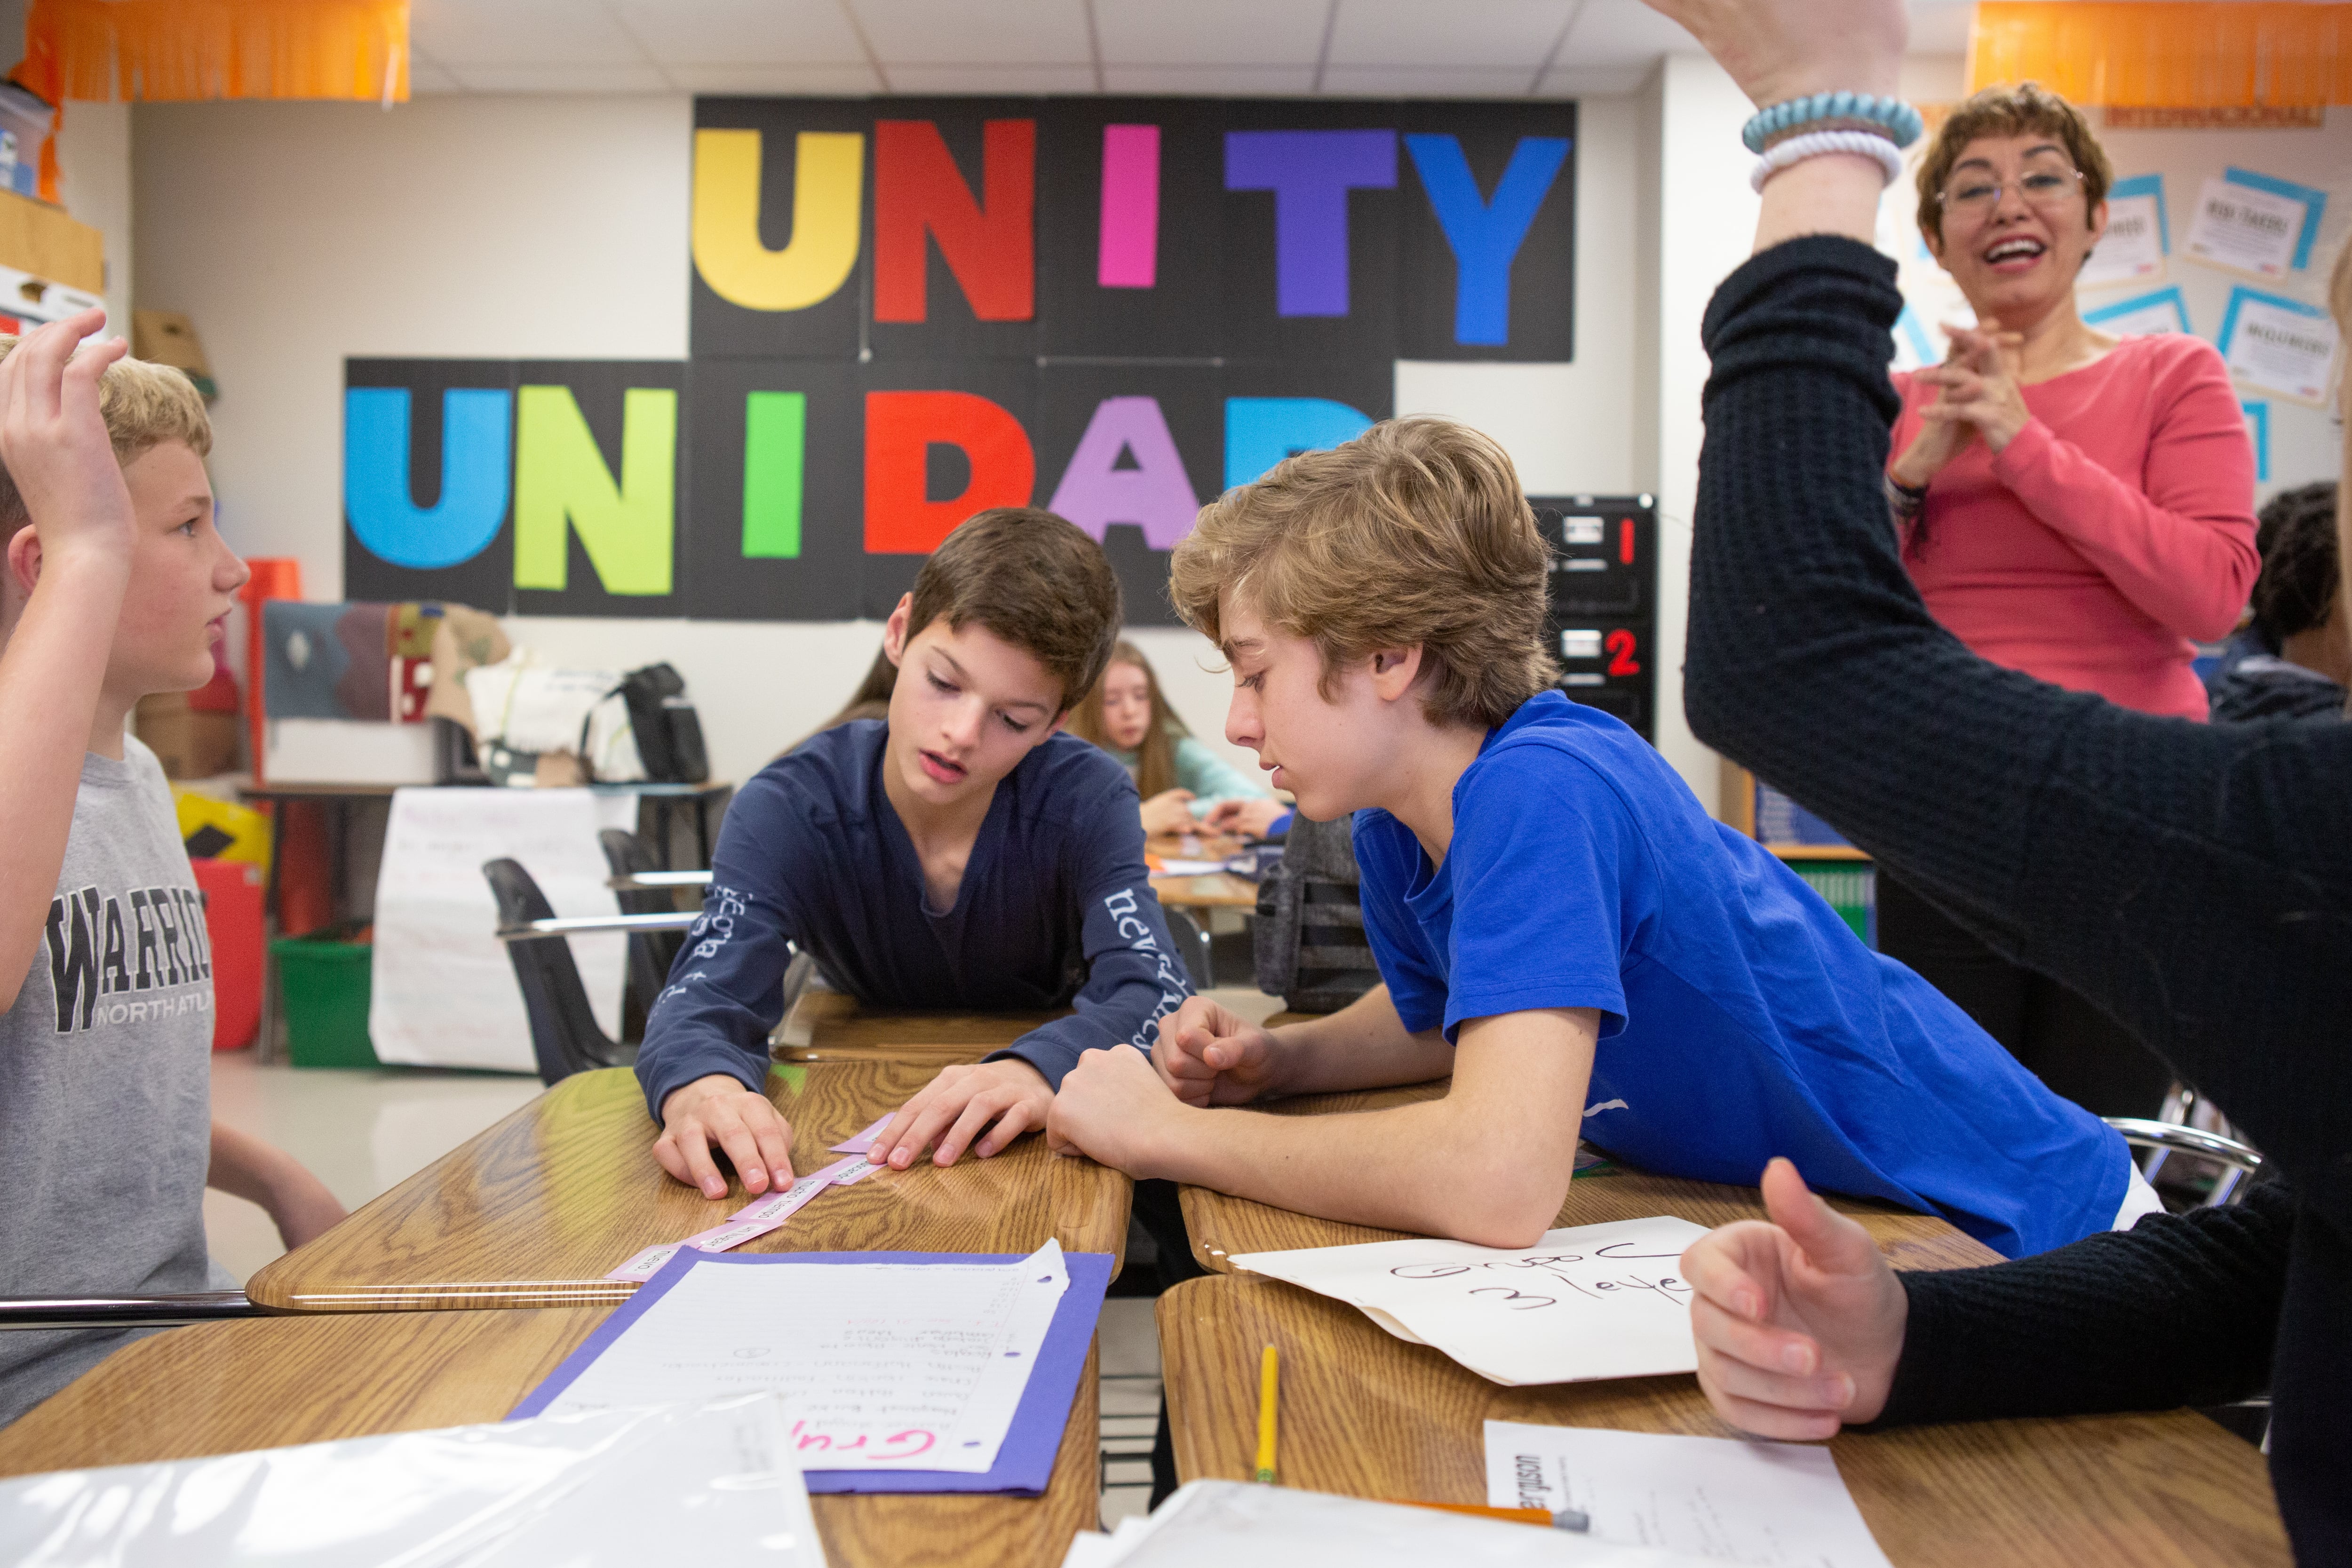 Young students work on their classwork in groups while the teacher stands behind them, clapping their hands in support. The wall in the background has colorful letters that read “Unity, Unidad”